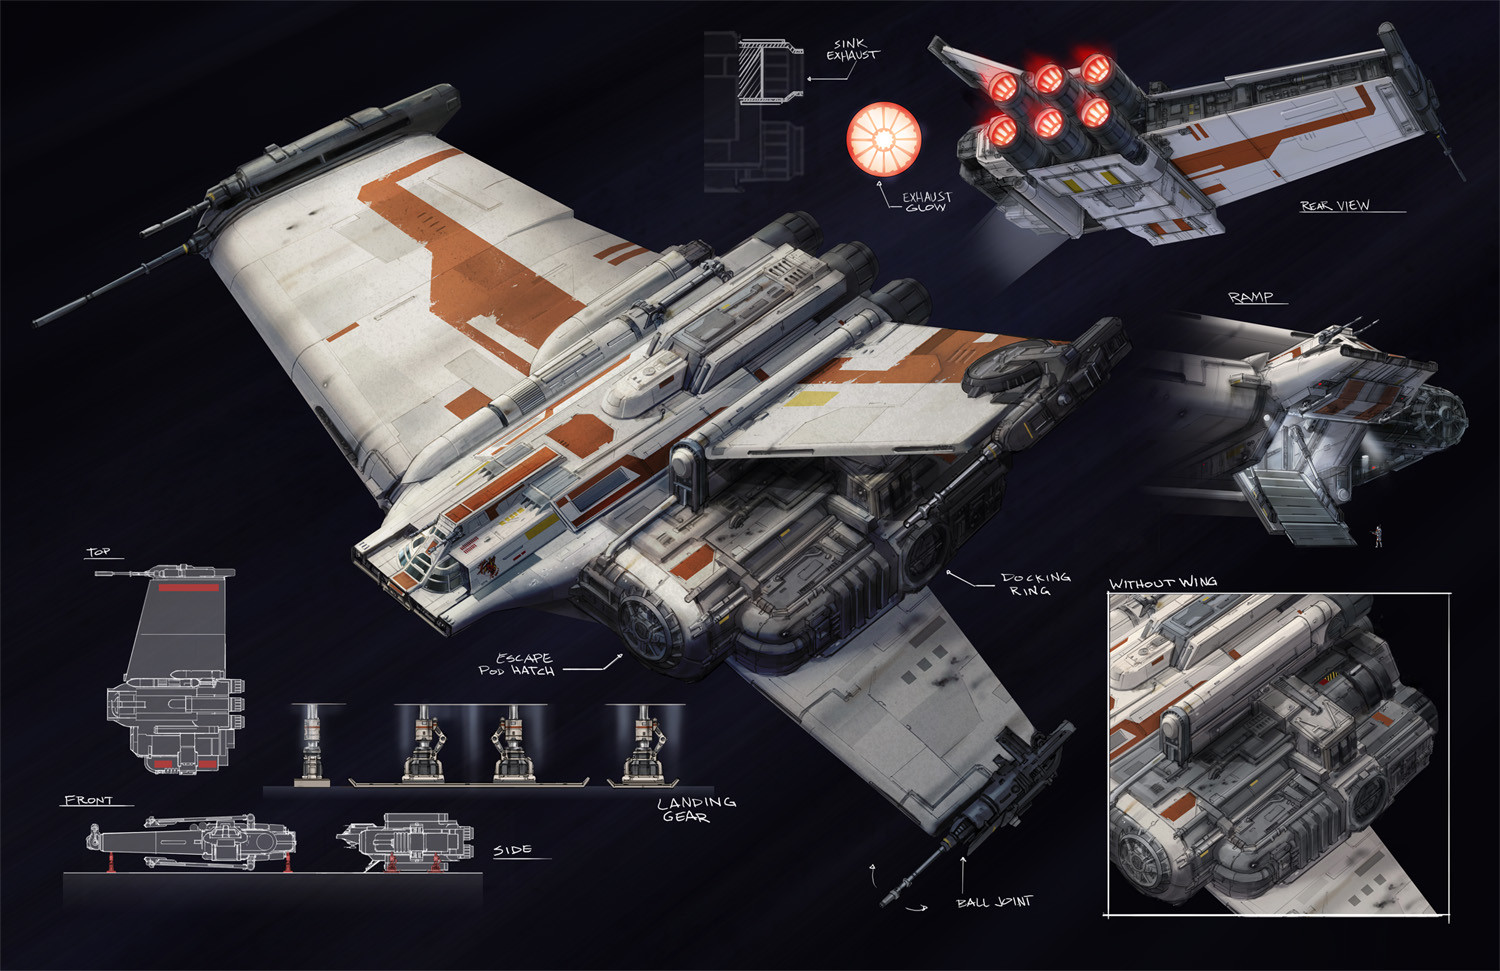 sith ships old republic